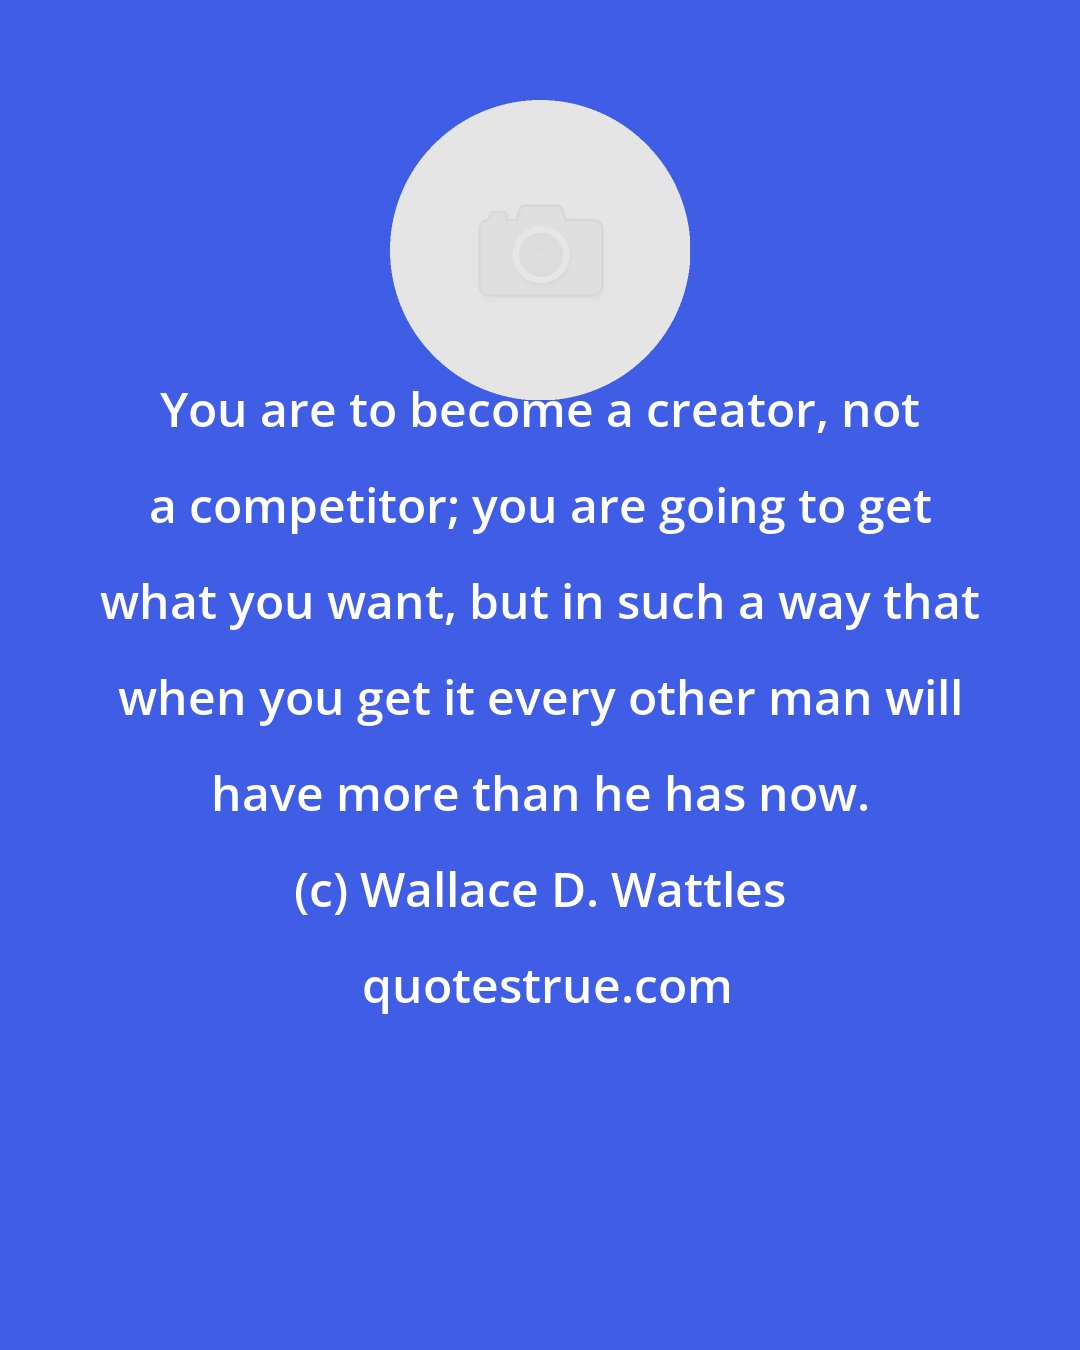 Wallace D. Wattles: You are to become a creator, not a competitor; you are going to get what you want, but in such a way that when you get it every other man will have more than he has now.